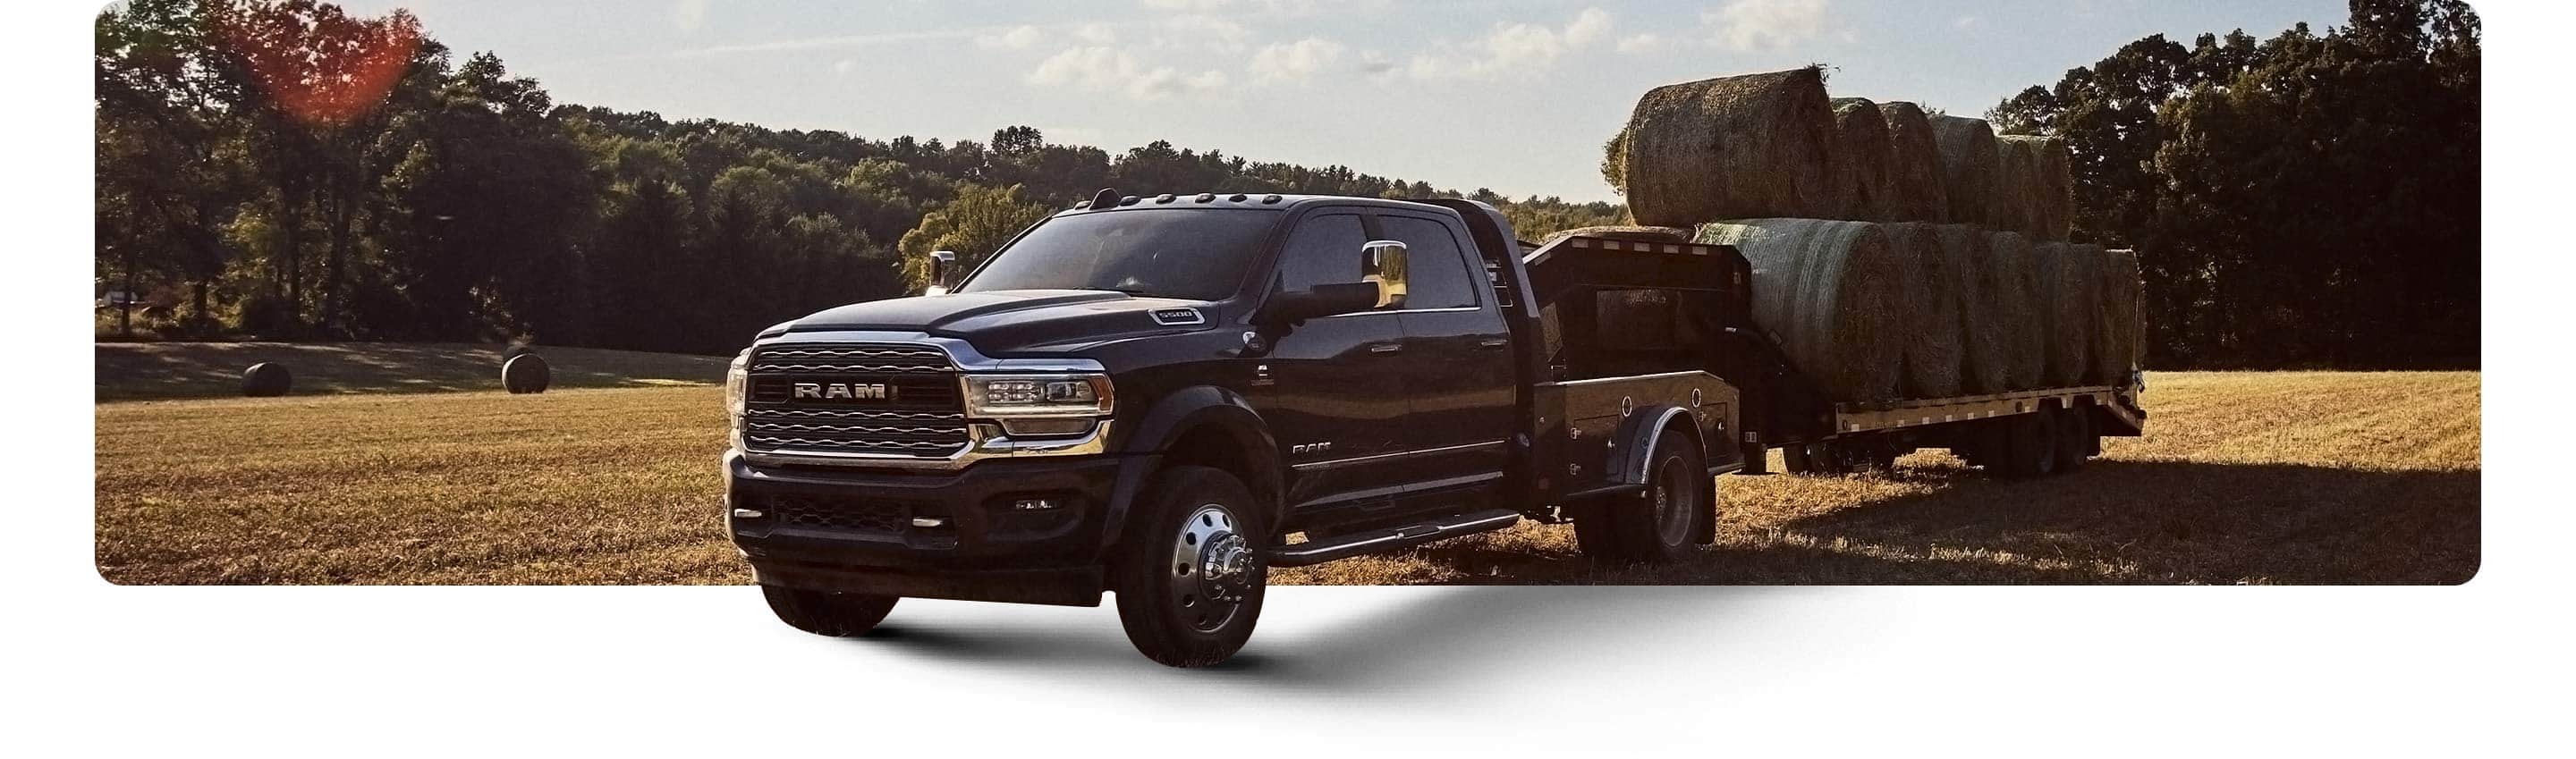 The 2021 Ram Chassis Cab towing a flatbed loaded with bales of hay through a field.